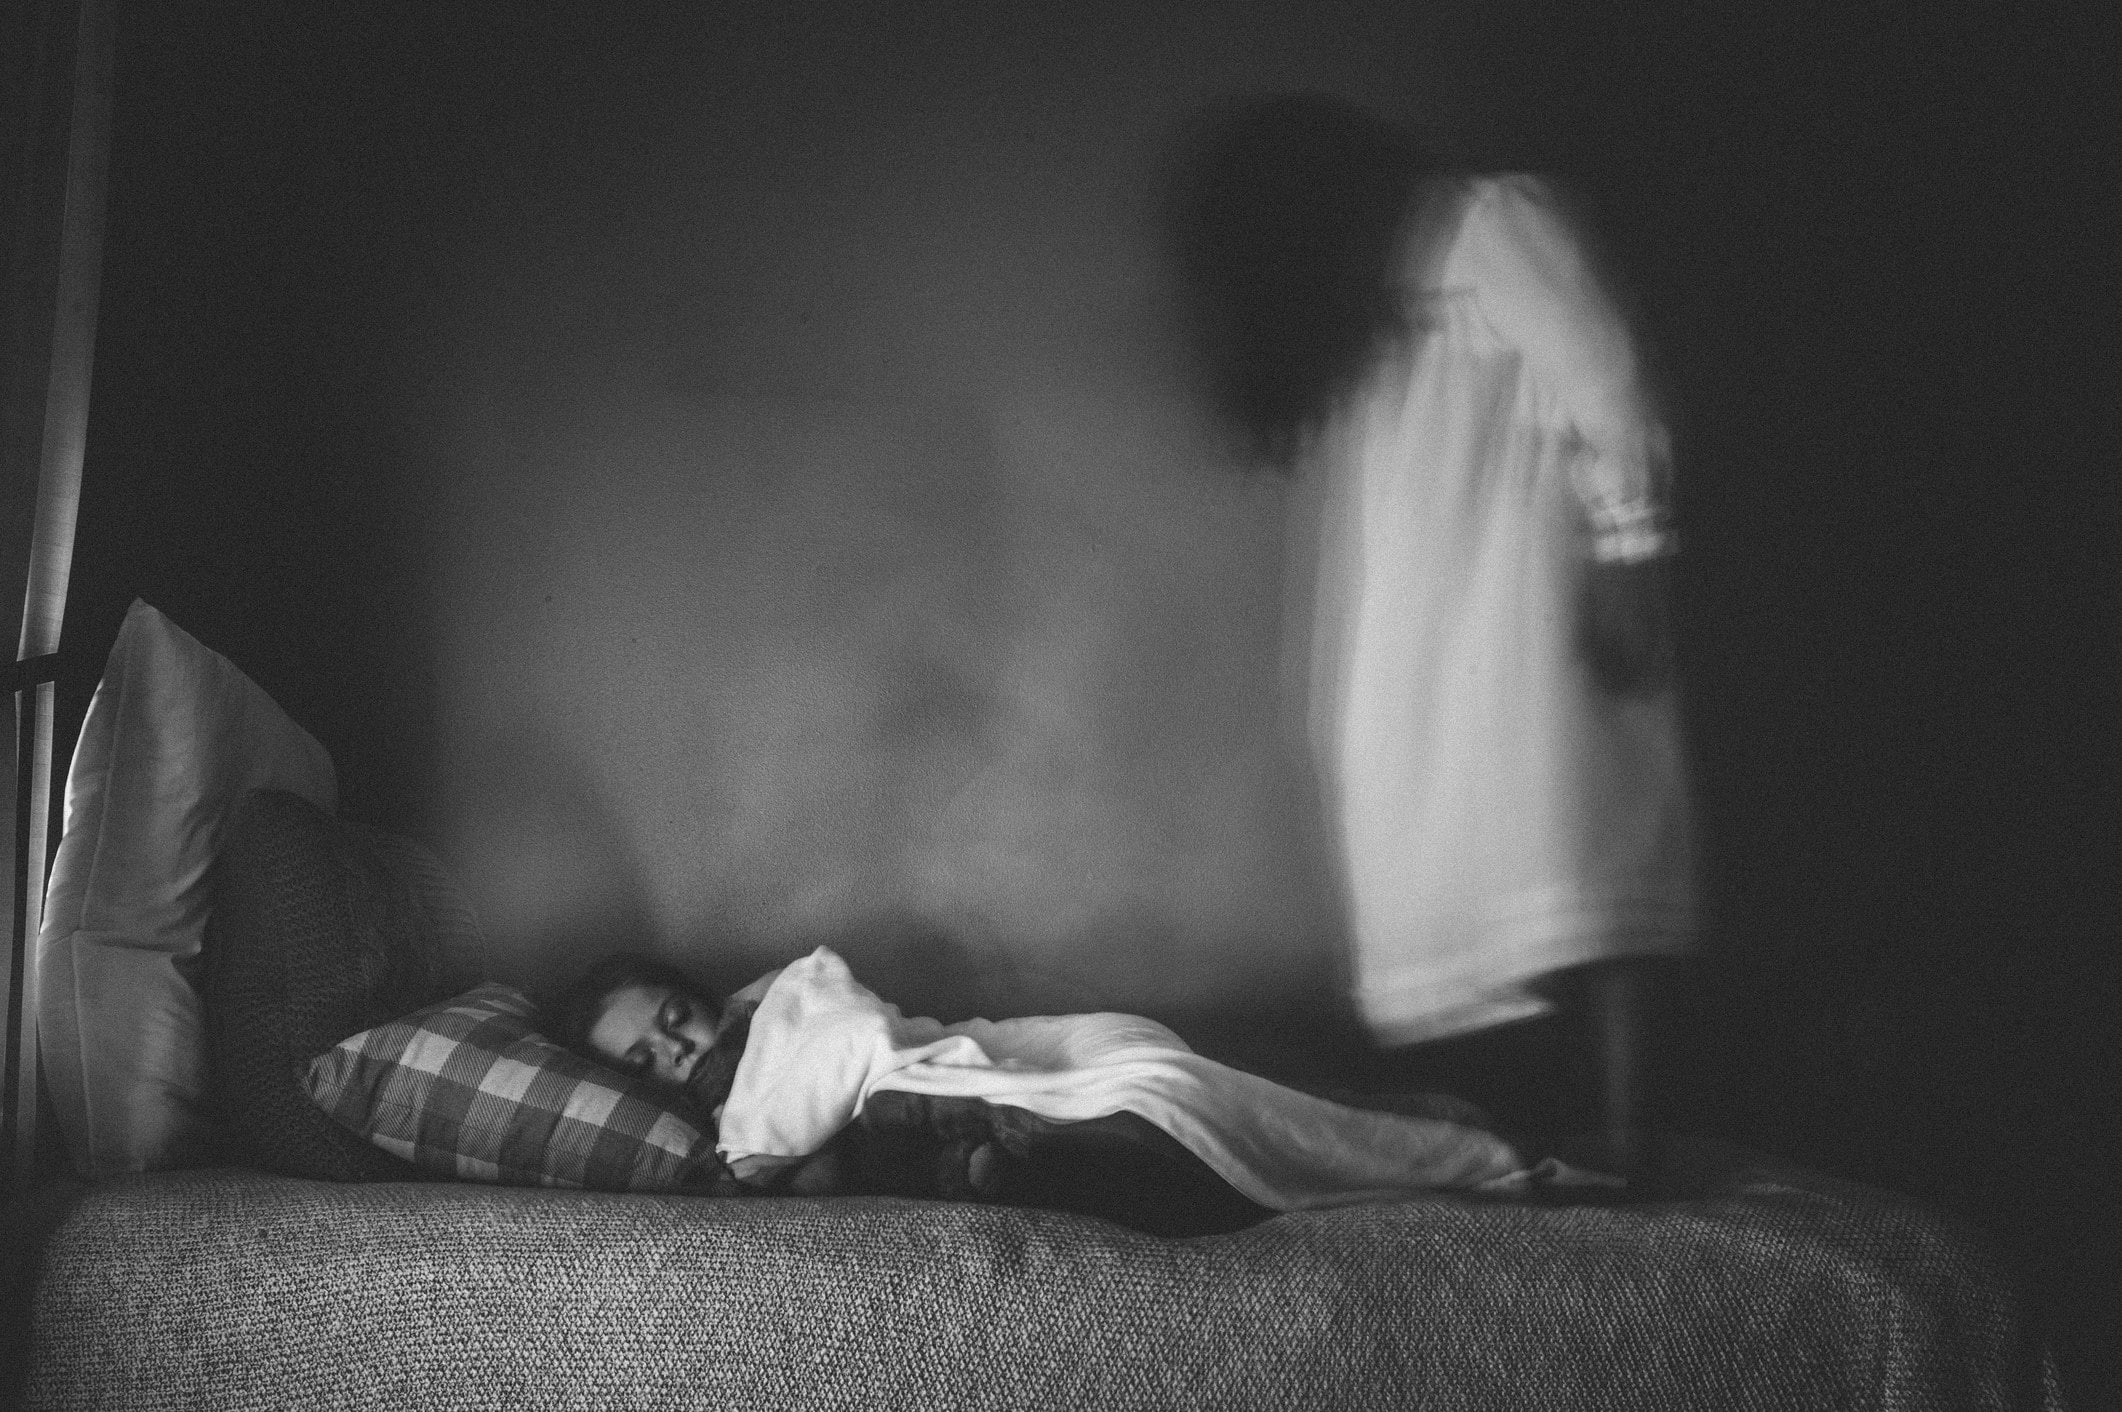 Sleep paralysis: an explanation for some ghost stories?